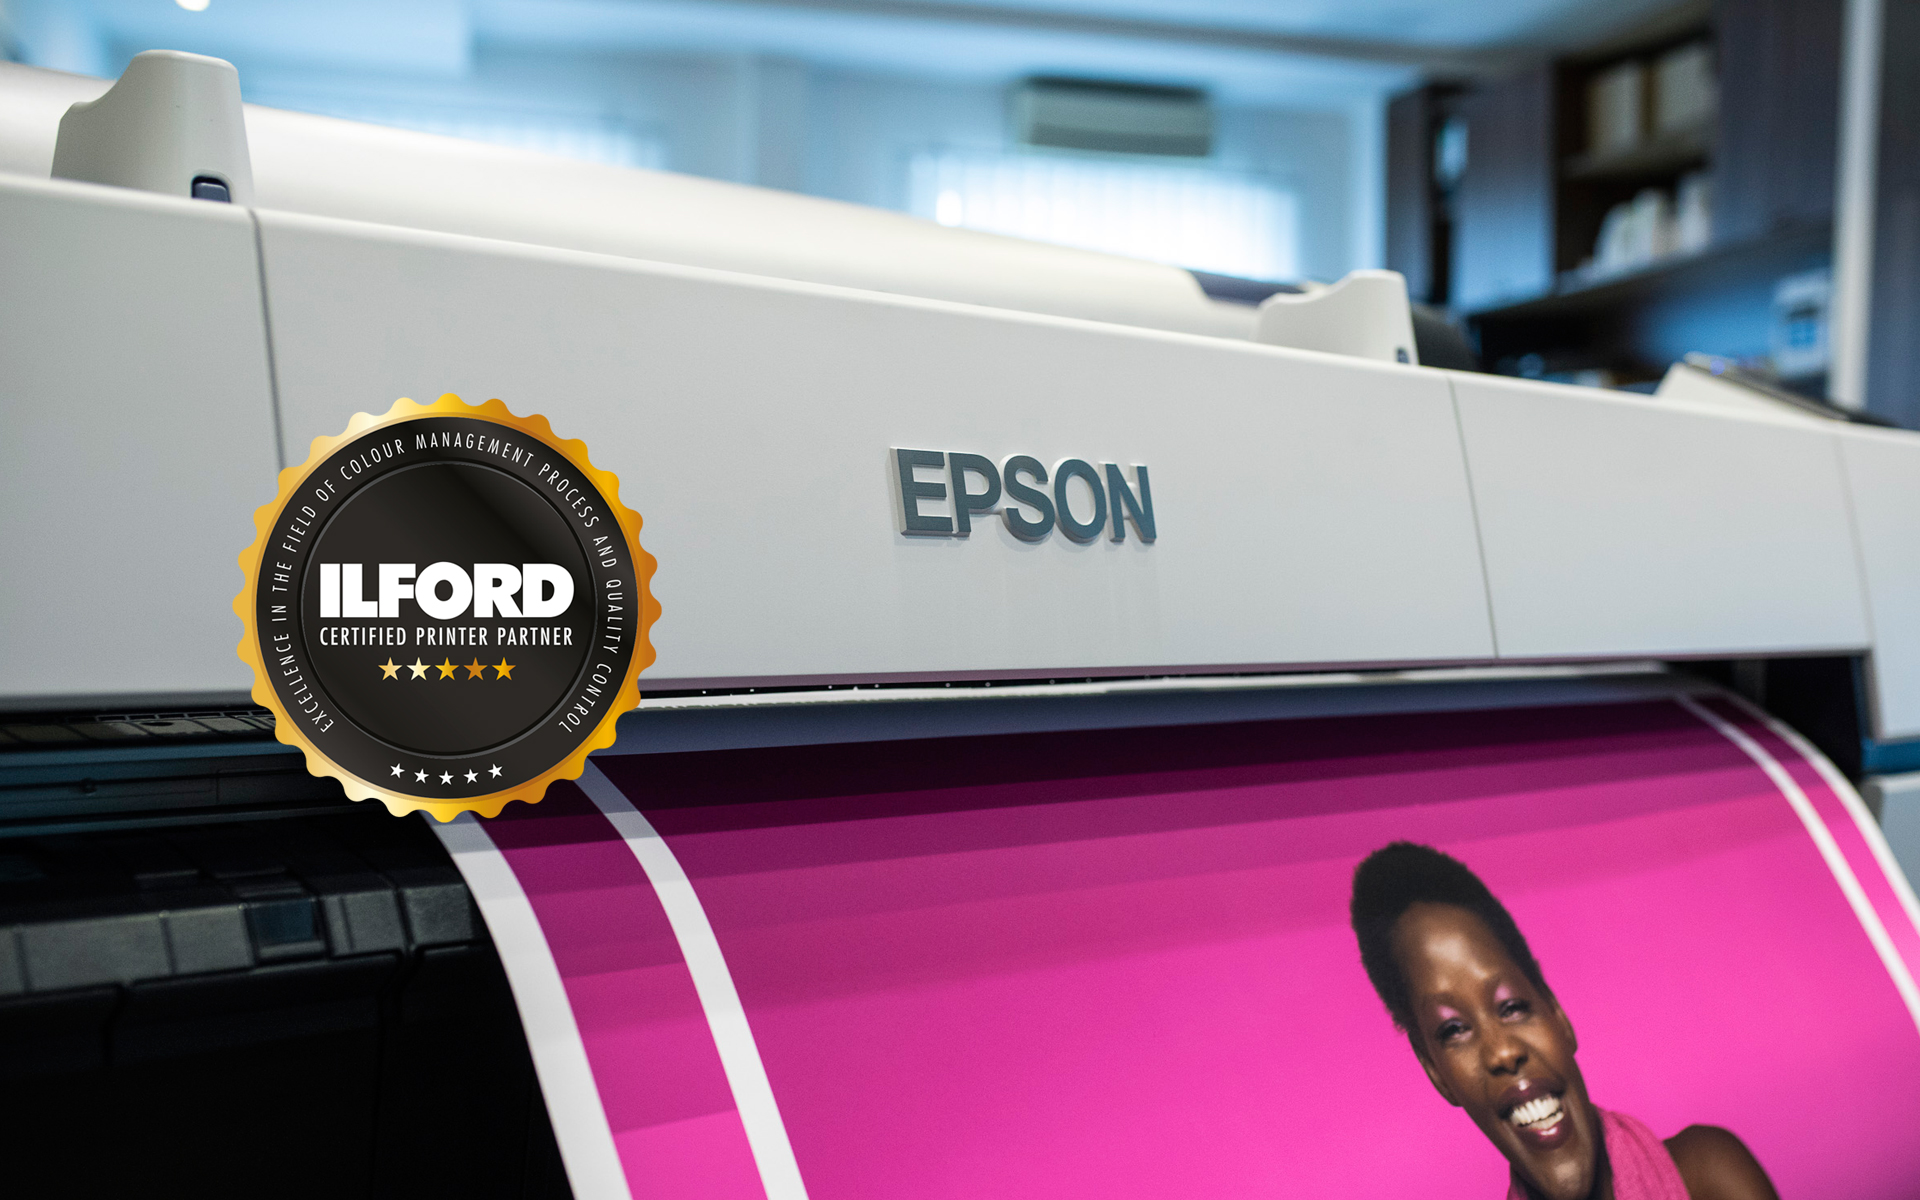 epson sc-p20000 printer and ilford papers for the highest print quality